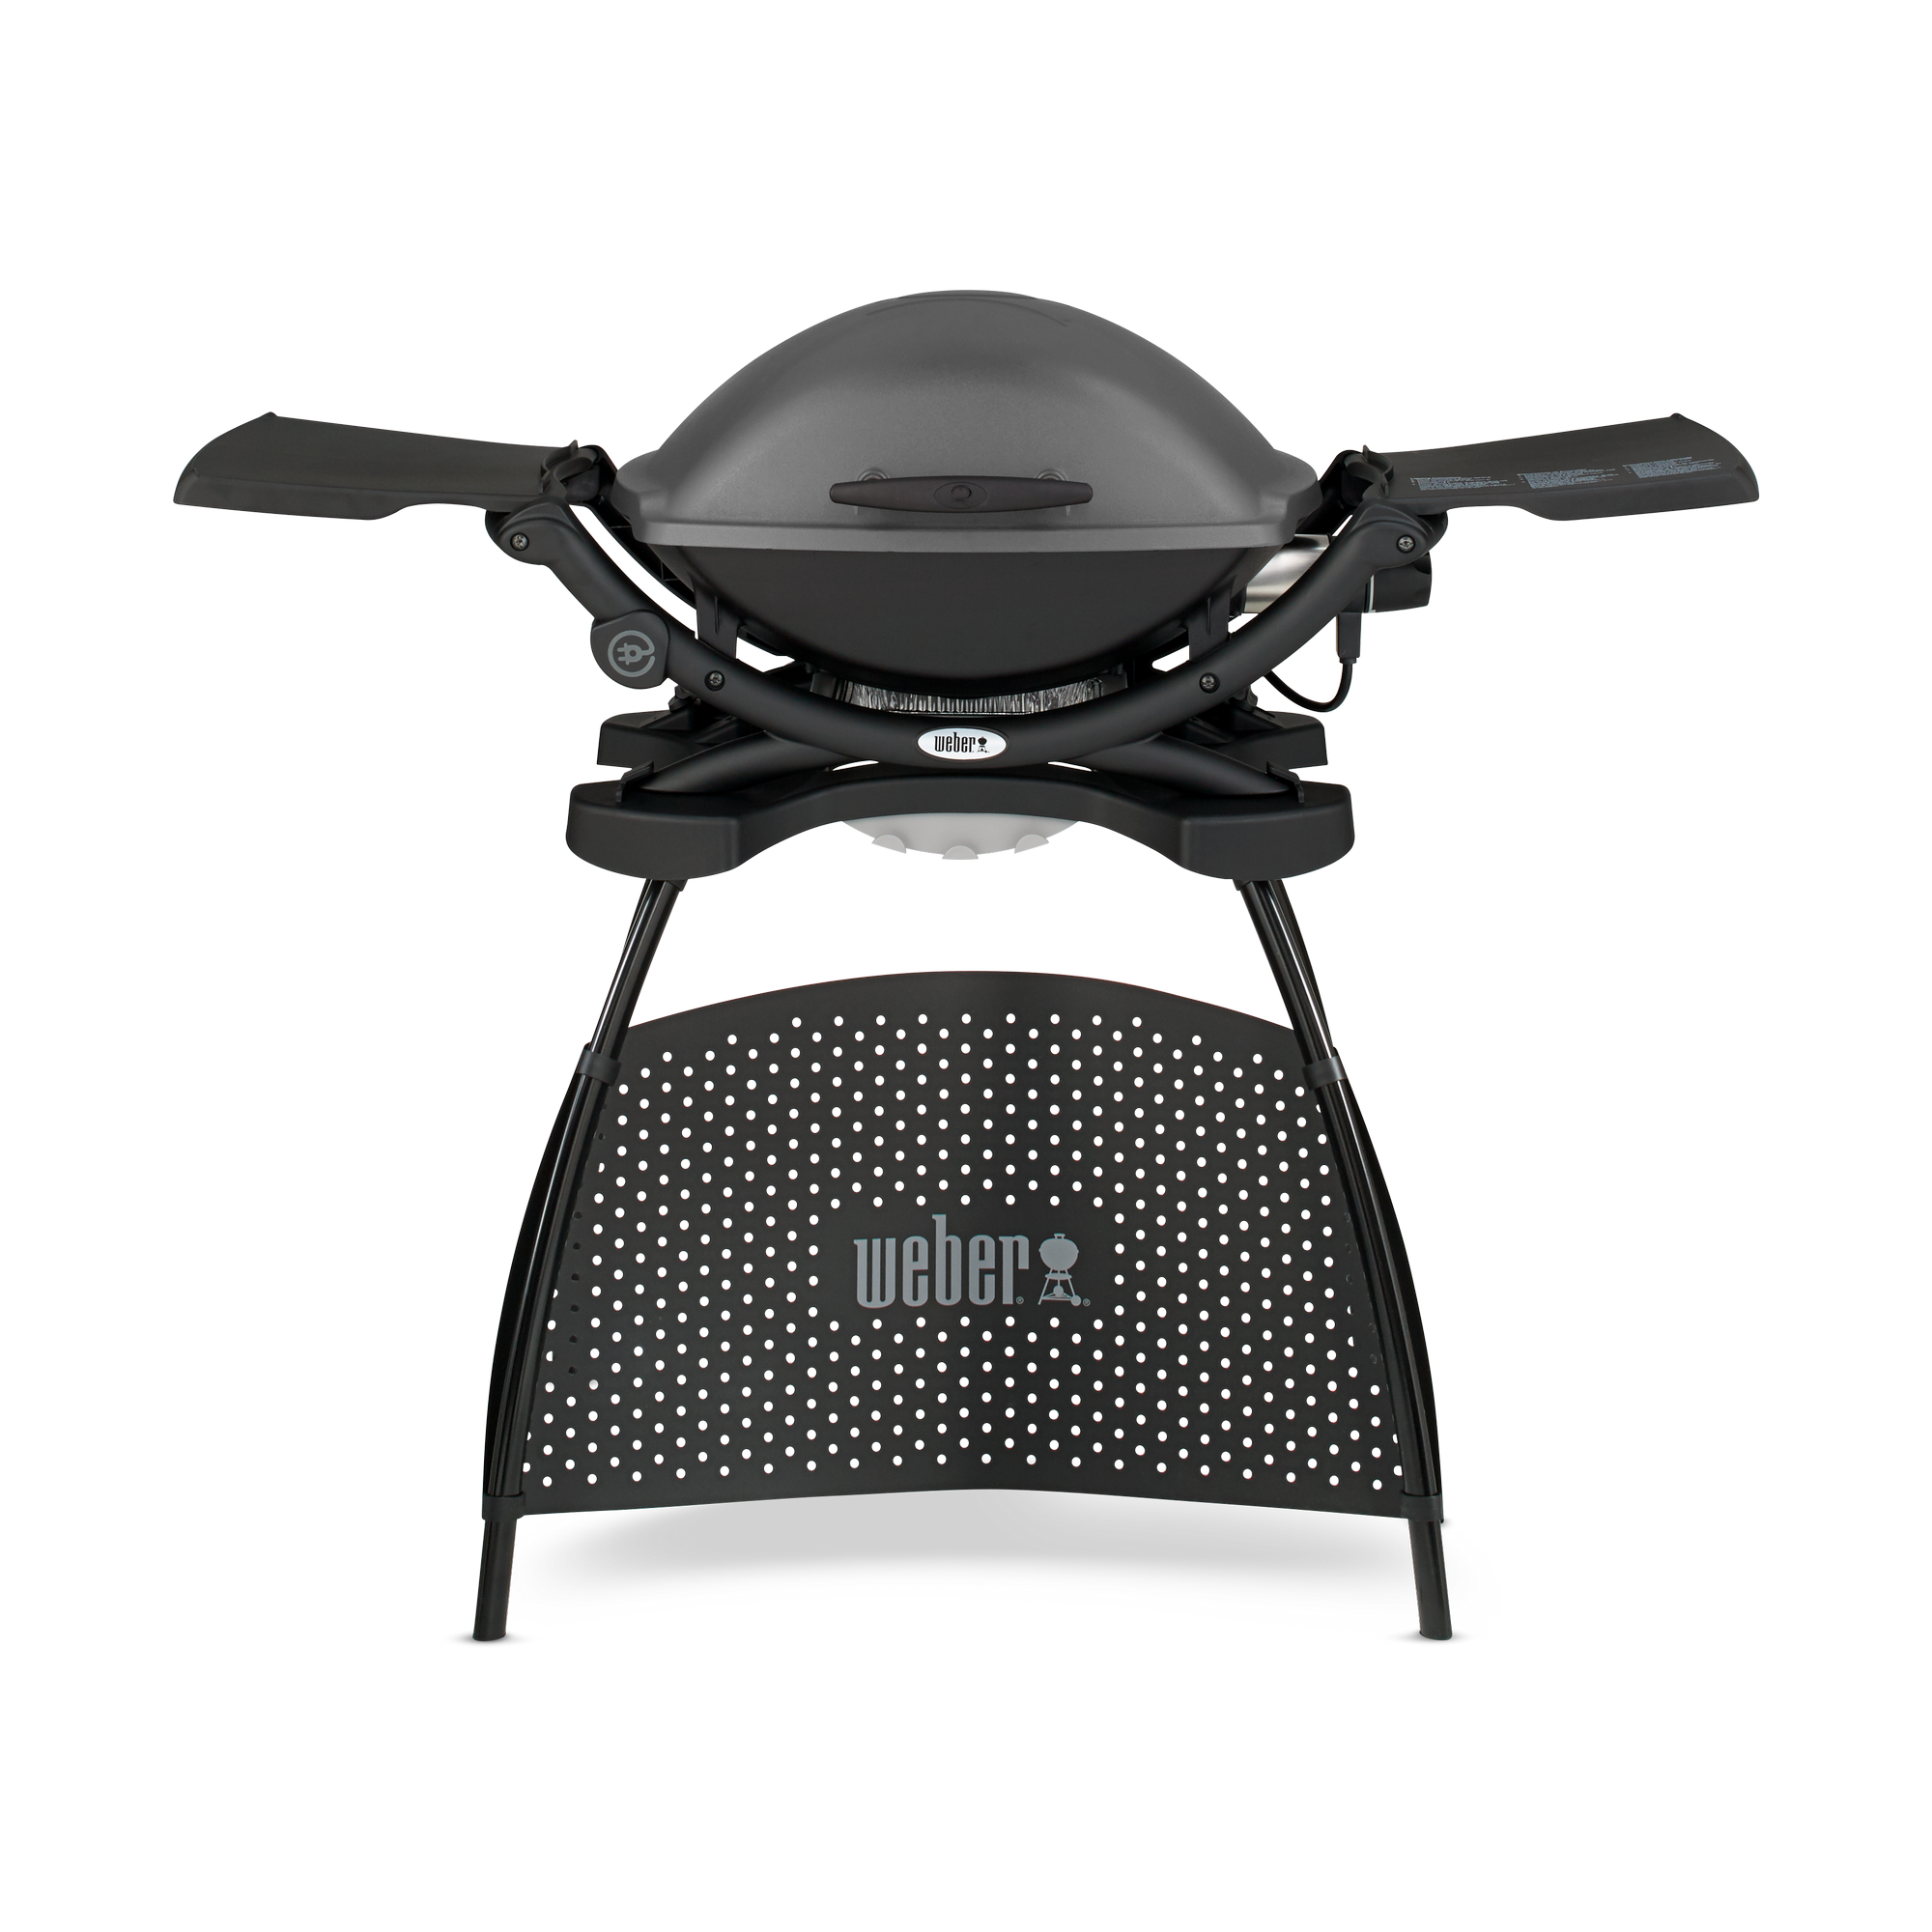 Elektrogrill 'Weber® Q 2400' mit Stand dunkelgrau + product picture